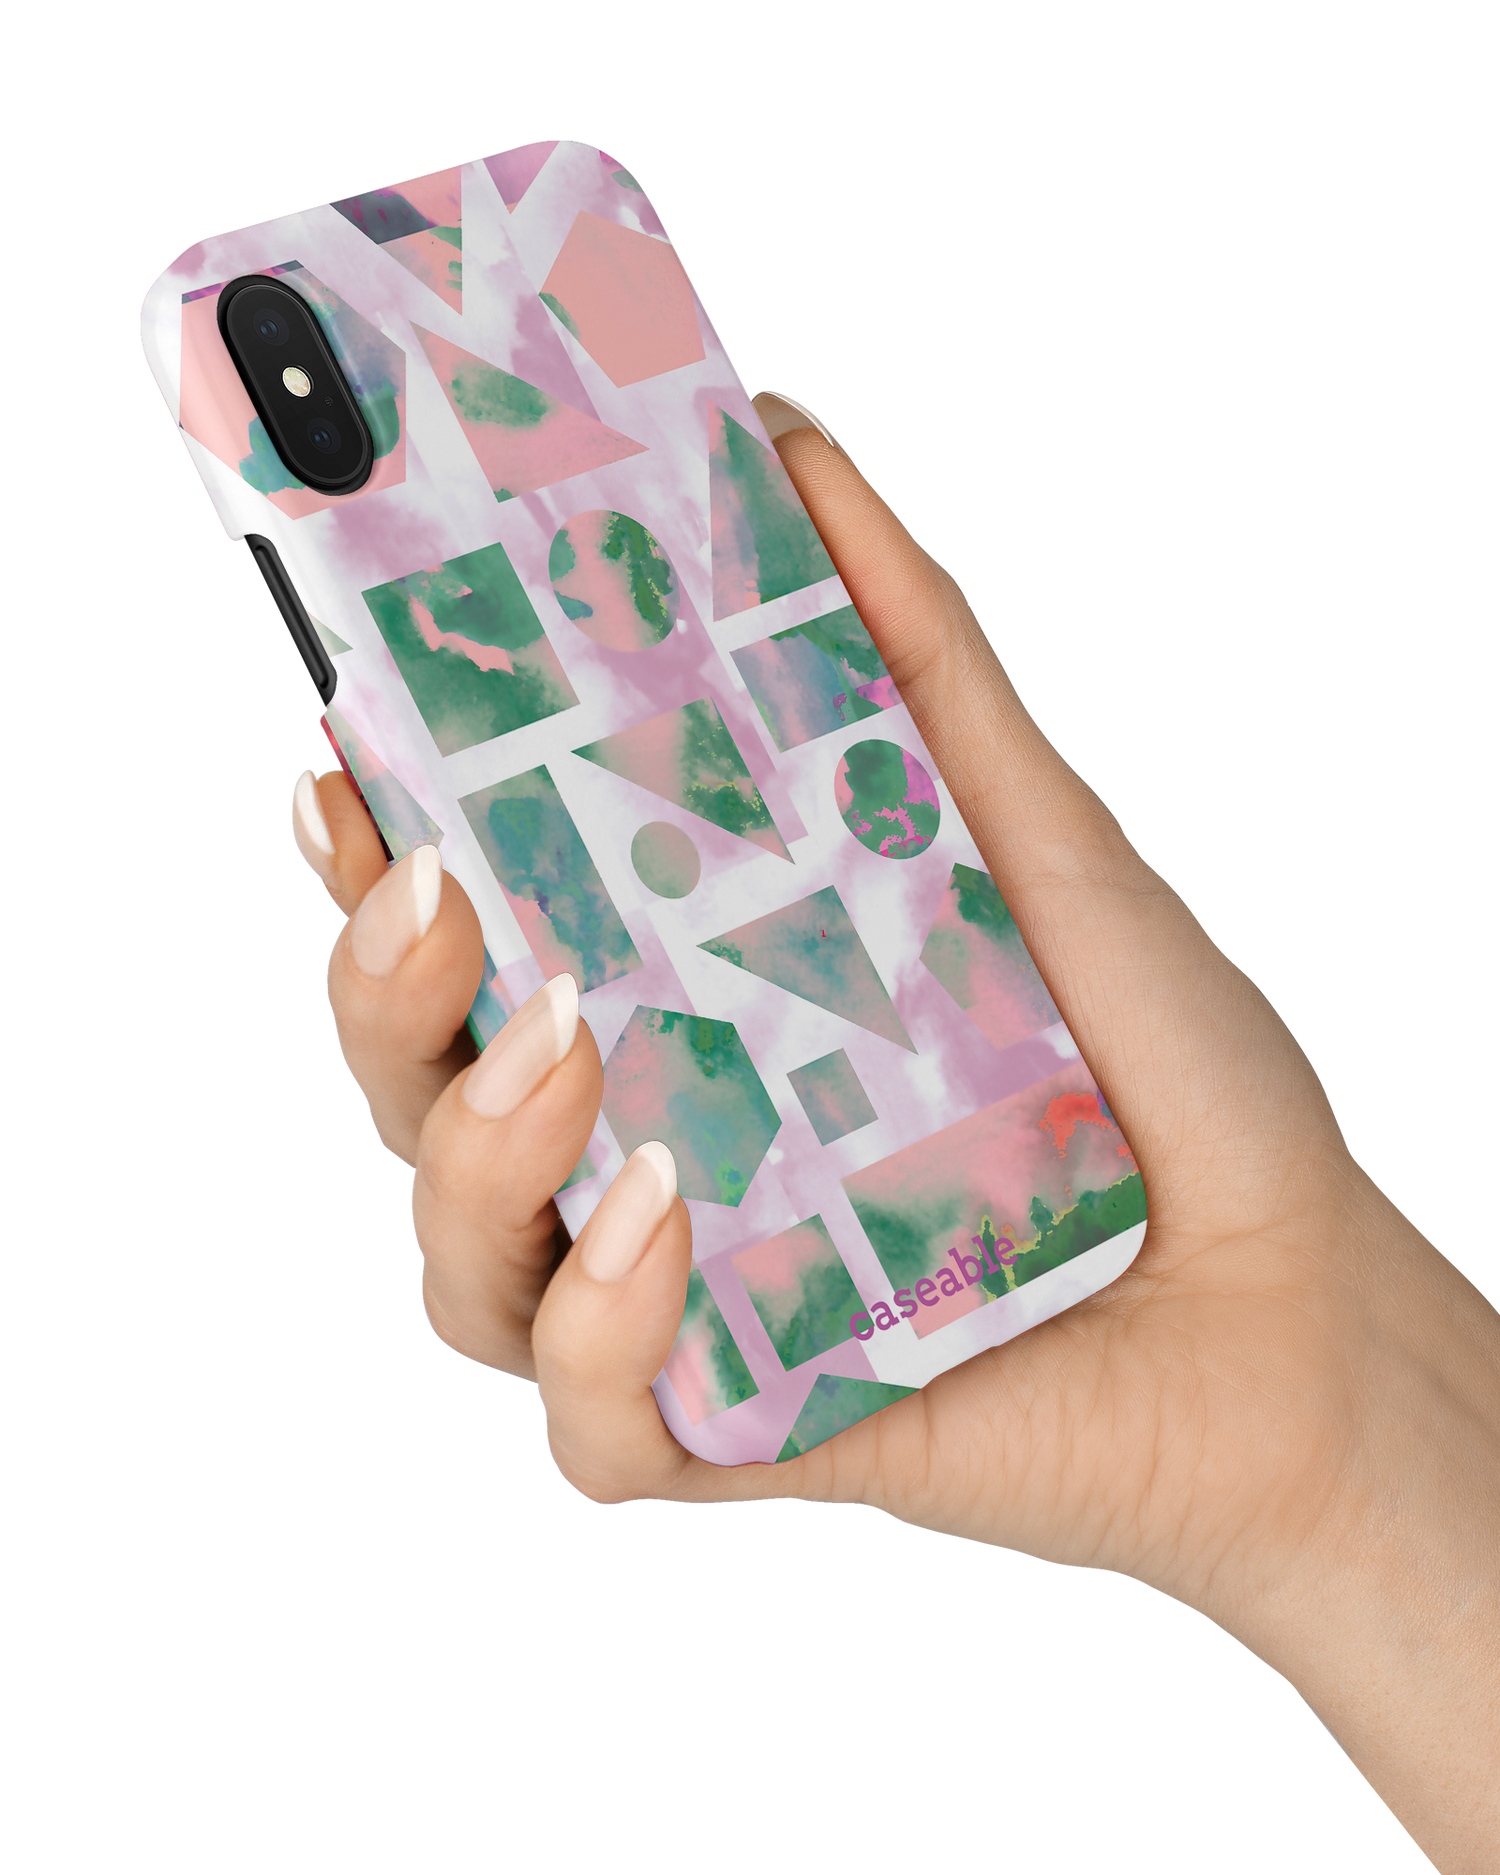 Dreamscapes Hard Shell Phone Case Apple iPhone X, Apple iPhone XS held in hand